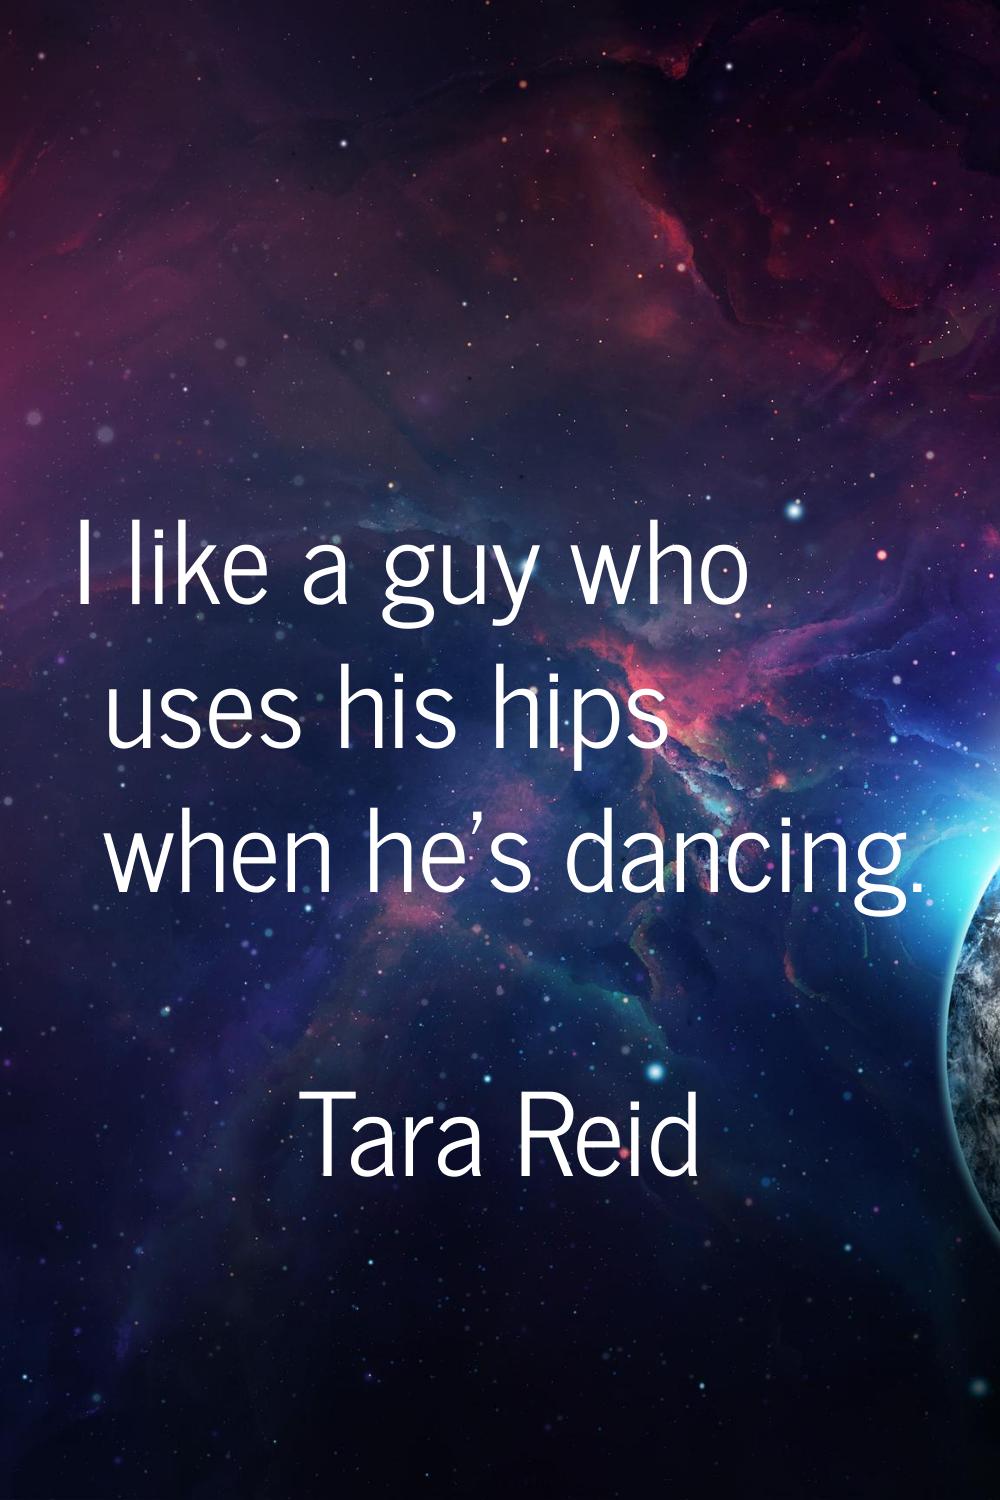 I like a guy who uses his hips when he's dancing.